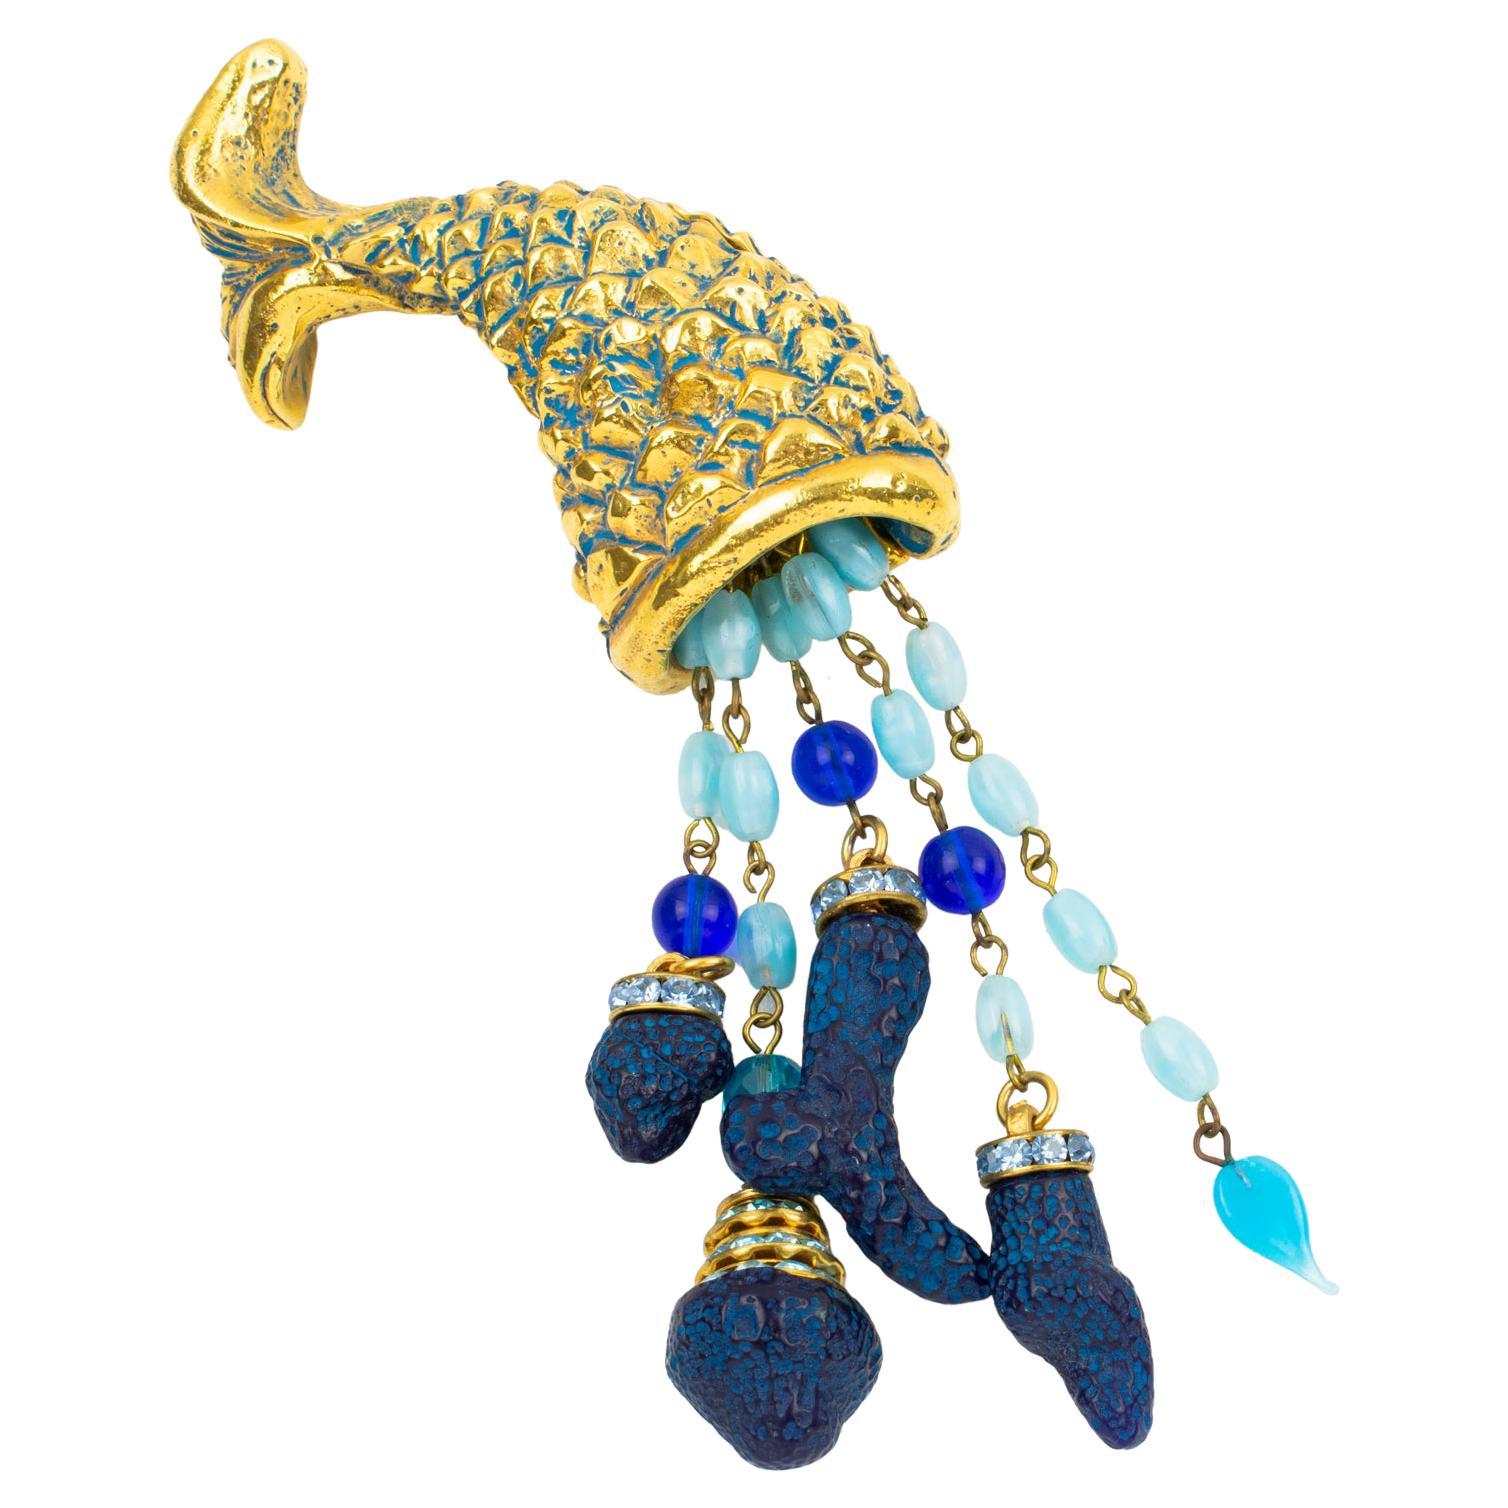 This gorgeous Kalinger Paris romantic pin brooch features a dimensional oversized nautical horn of plenty, made of gold-plated coated resin, all carved like a fishtail and body and ornate with extra-long dangling charms. The charms are made of